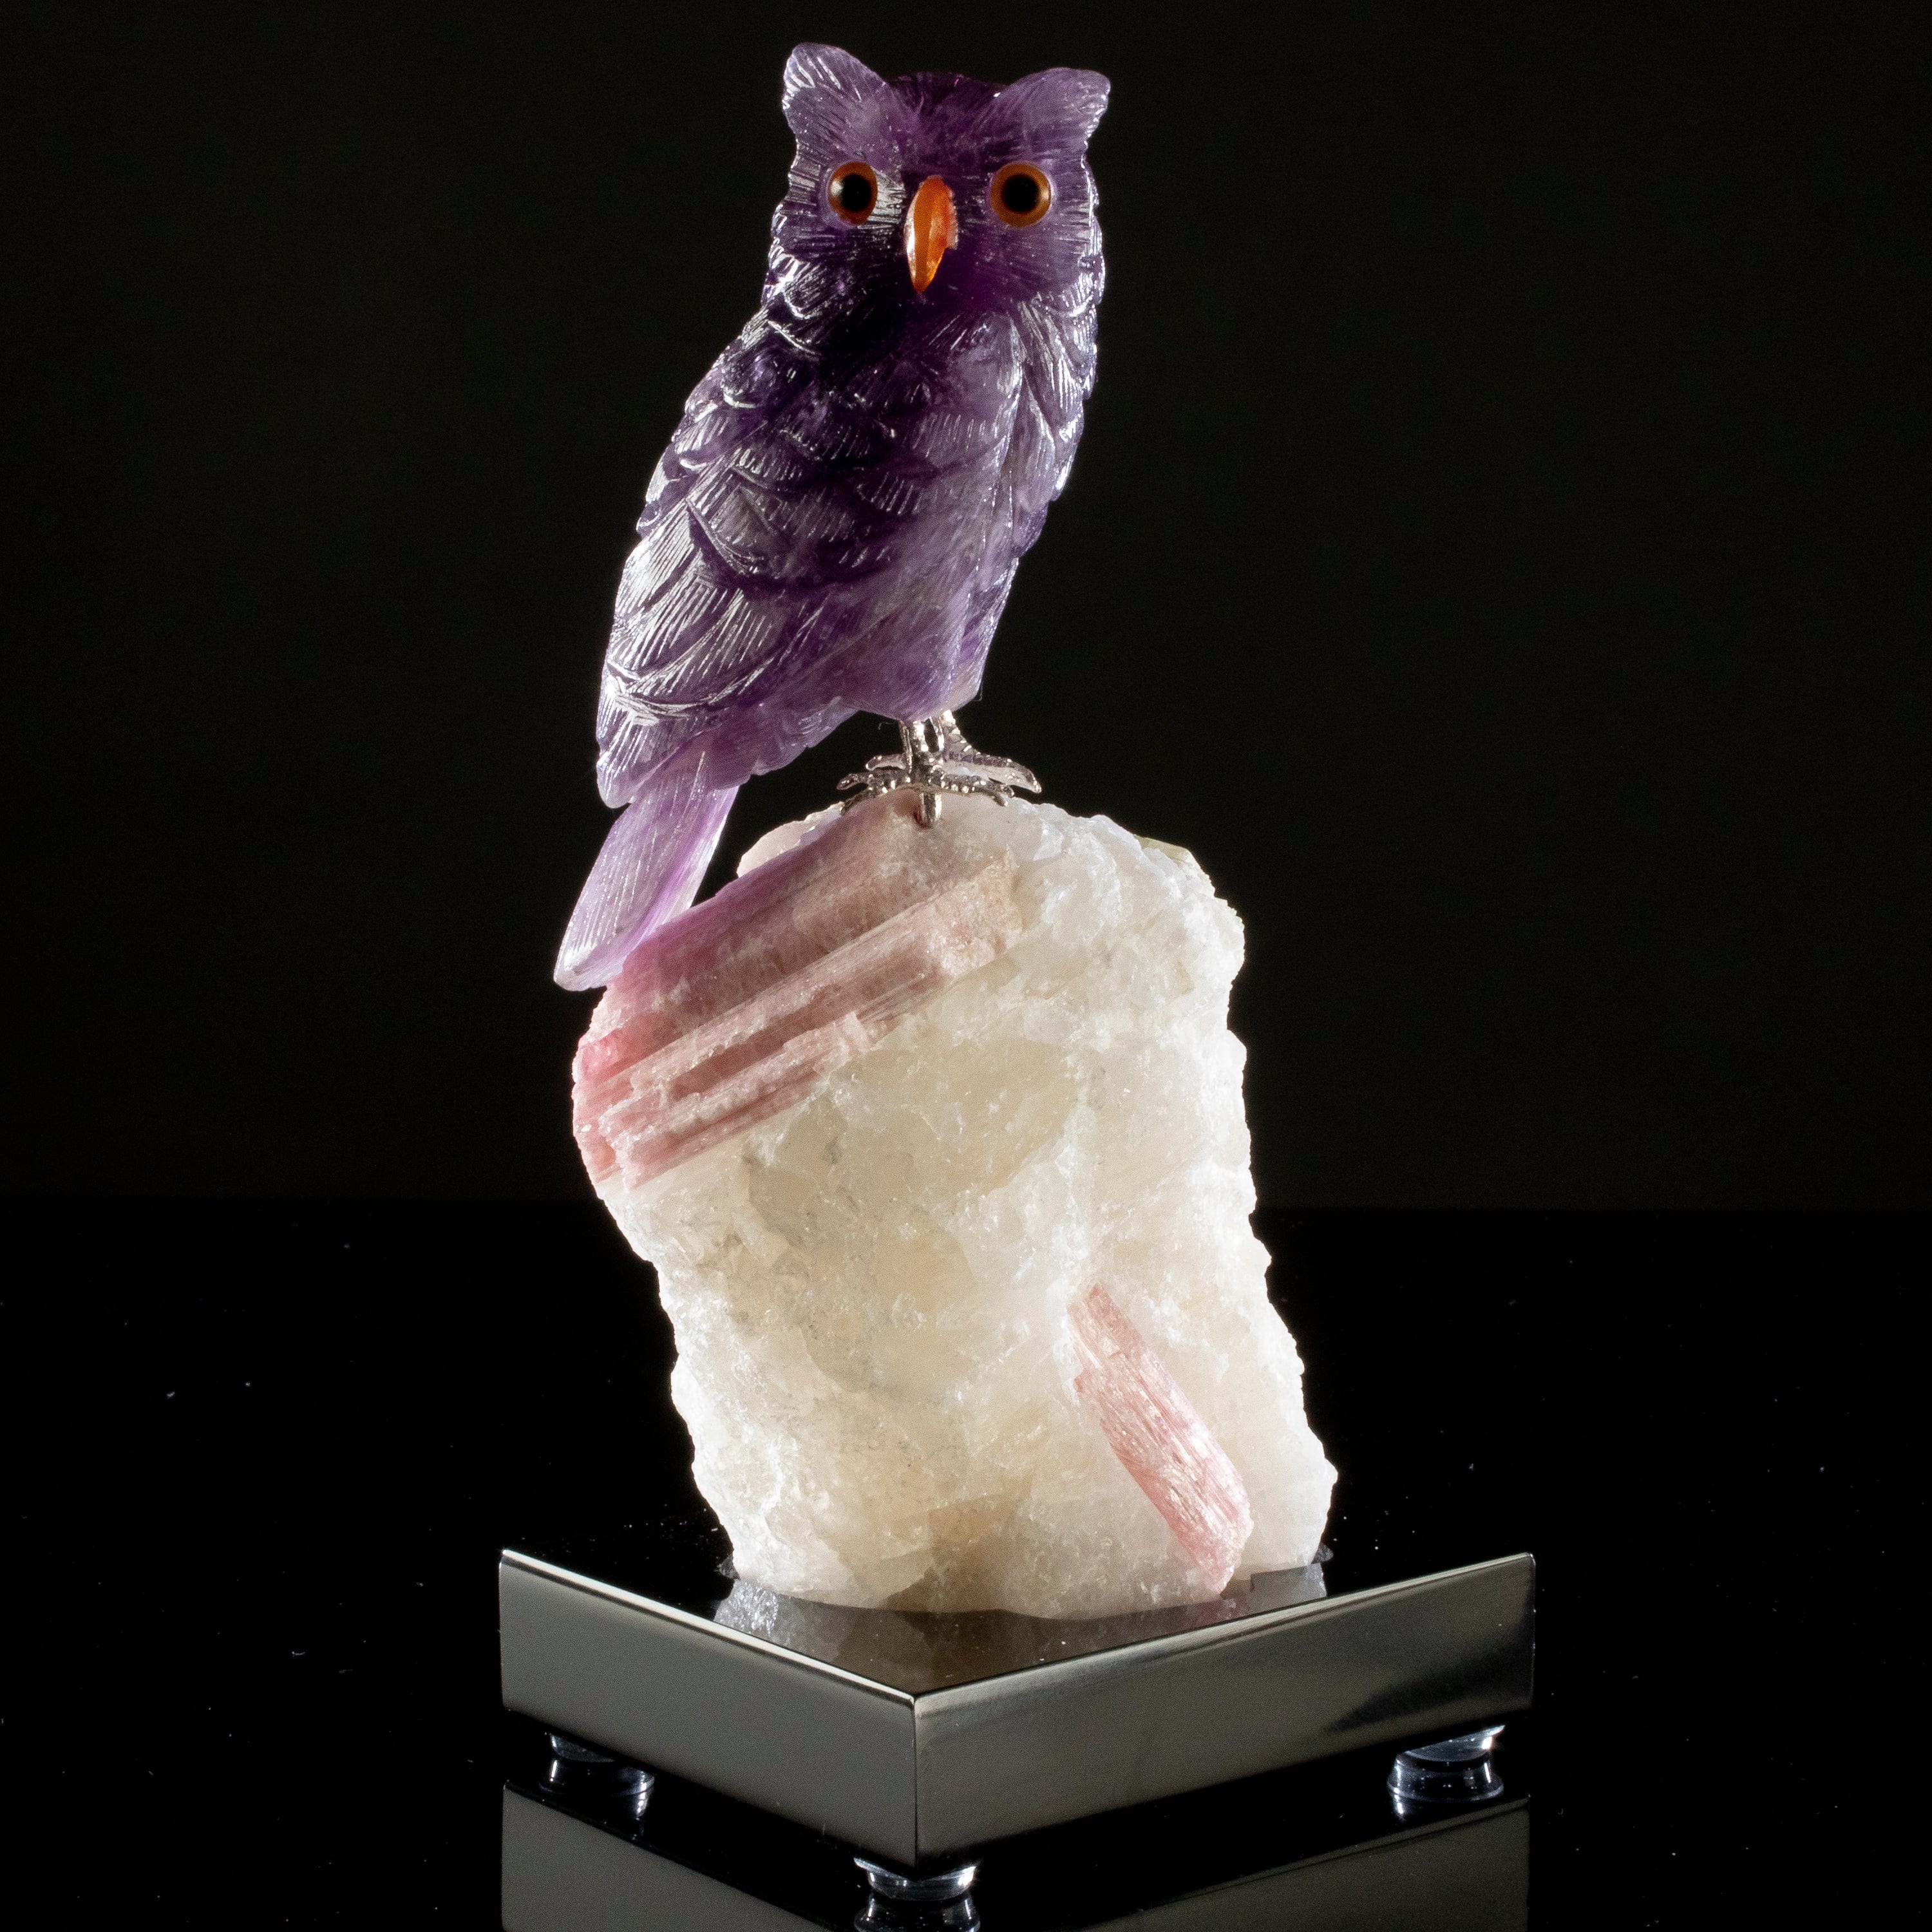 New! Quartz Crystal Carved Parrot with Amethyst Crystal Wings on a